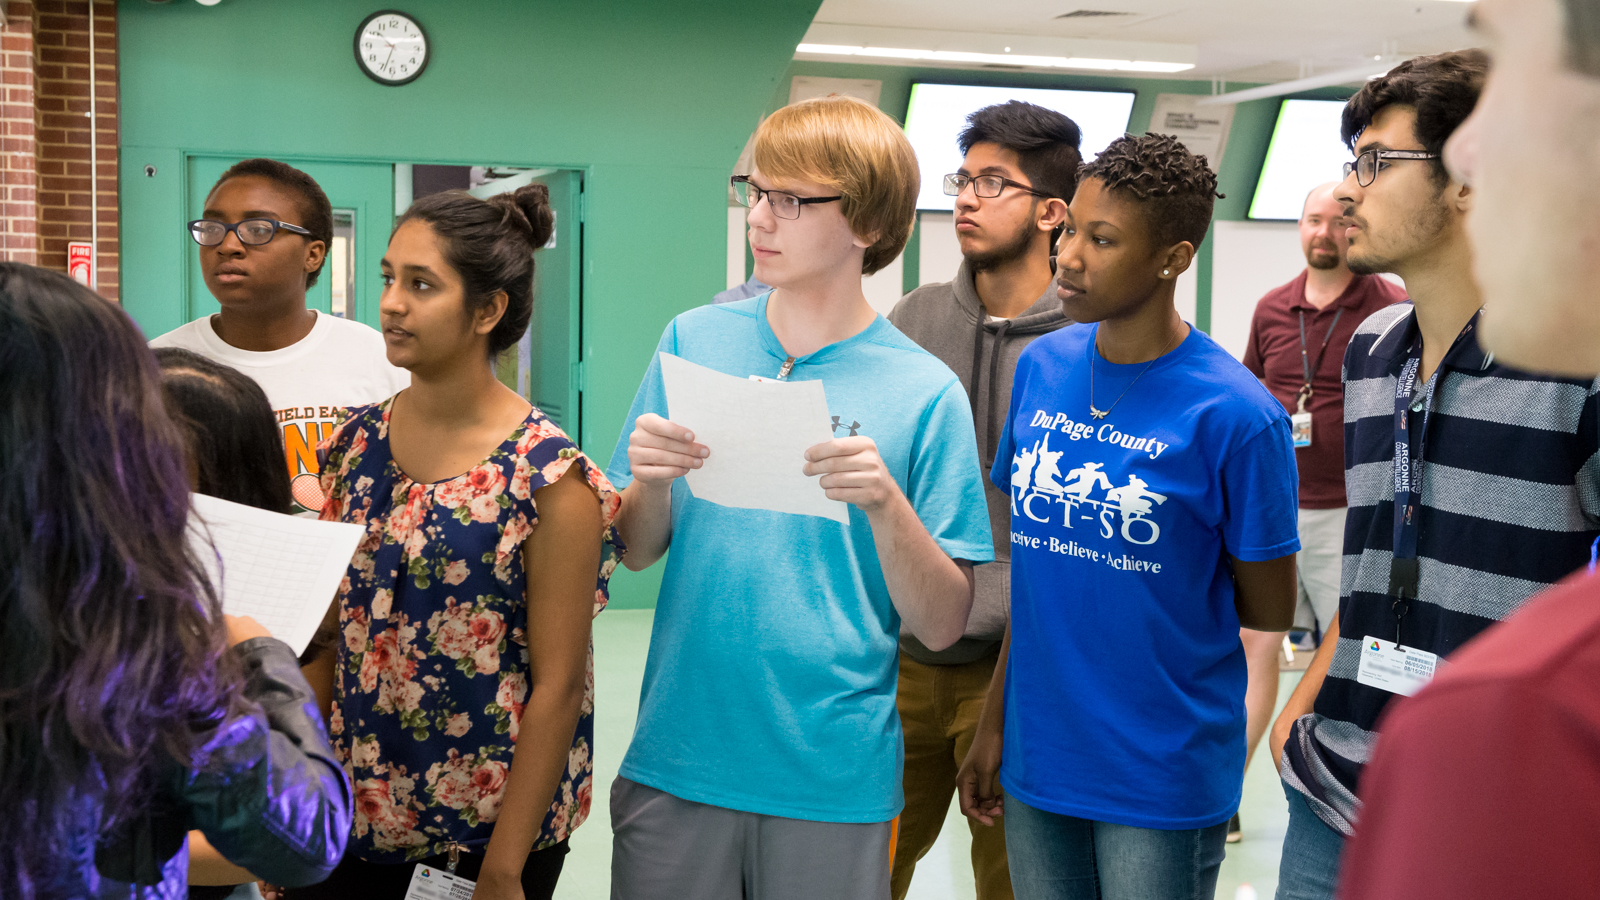 These students learned ways to interpret and visualize data at Argonne over the summer. (Image by Argonne National Laboratory.)